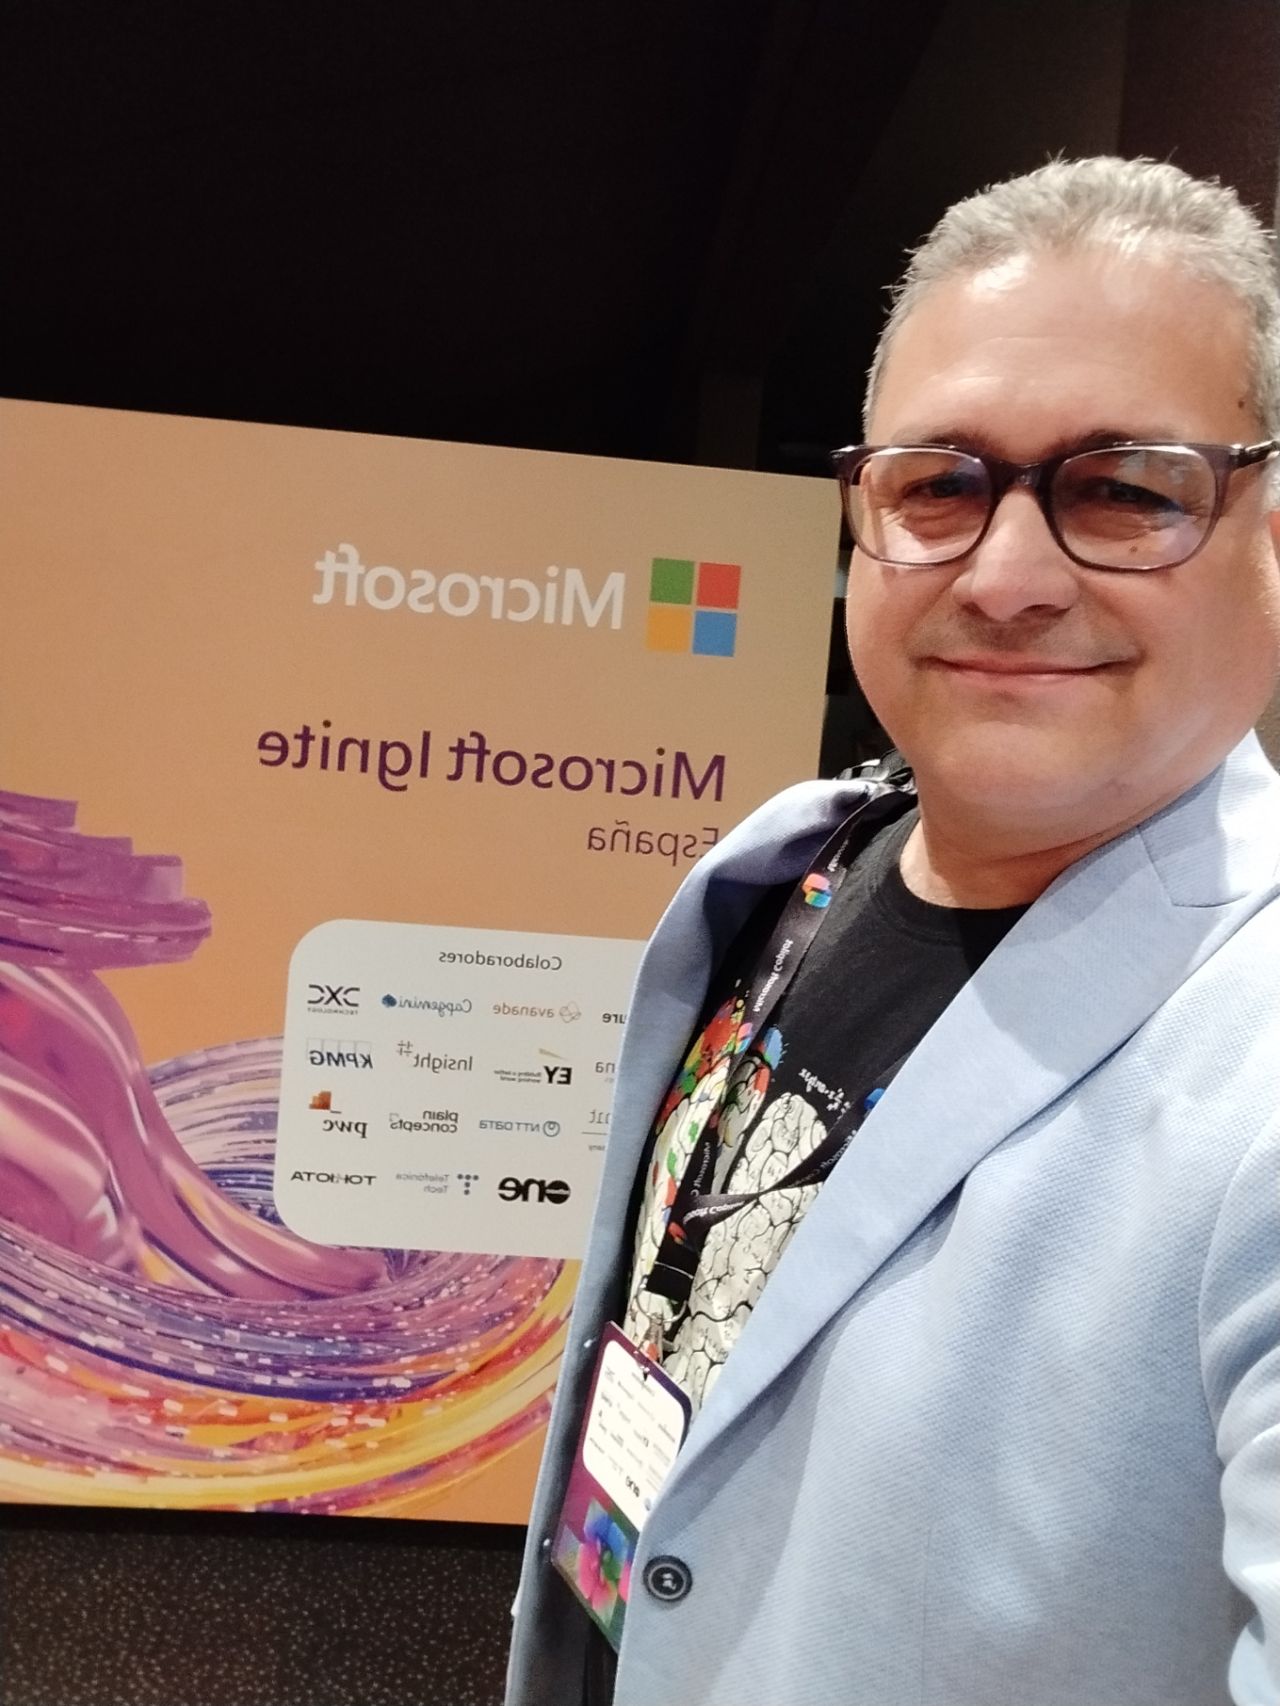 ABS - Roberto Suarez at the Microsoft AI event in Madrid